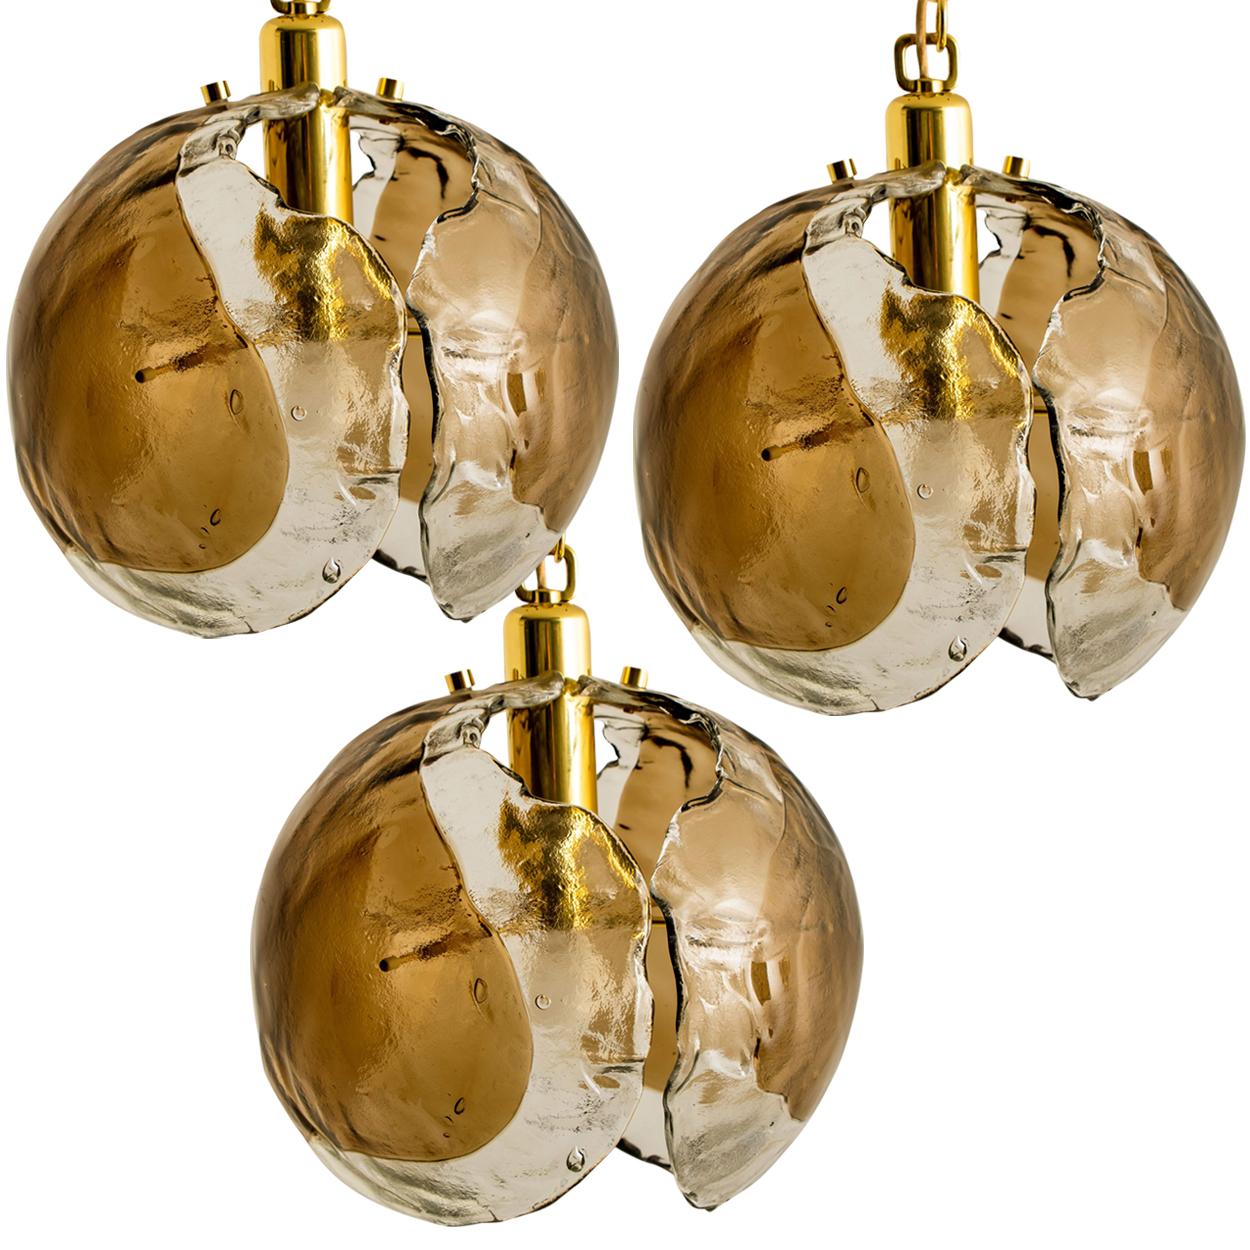 1 of the 3 Kalmar Chandelier Pendant Lights, Smoked Glass and Brass, 1970s For Sale 11